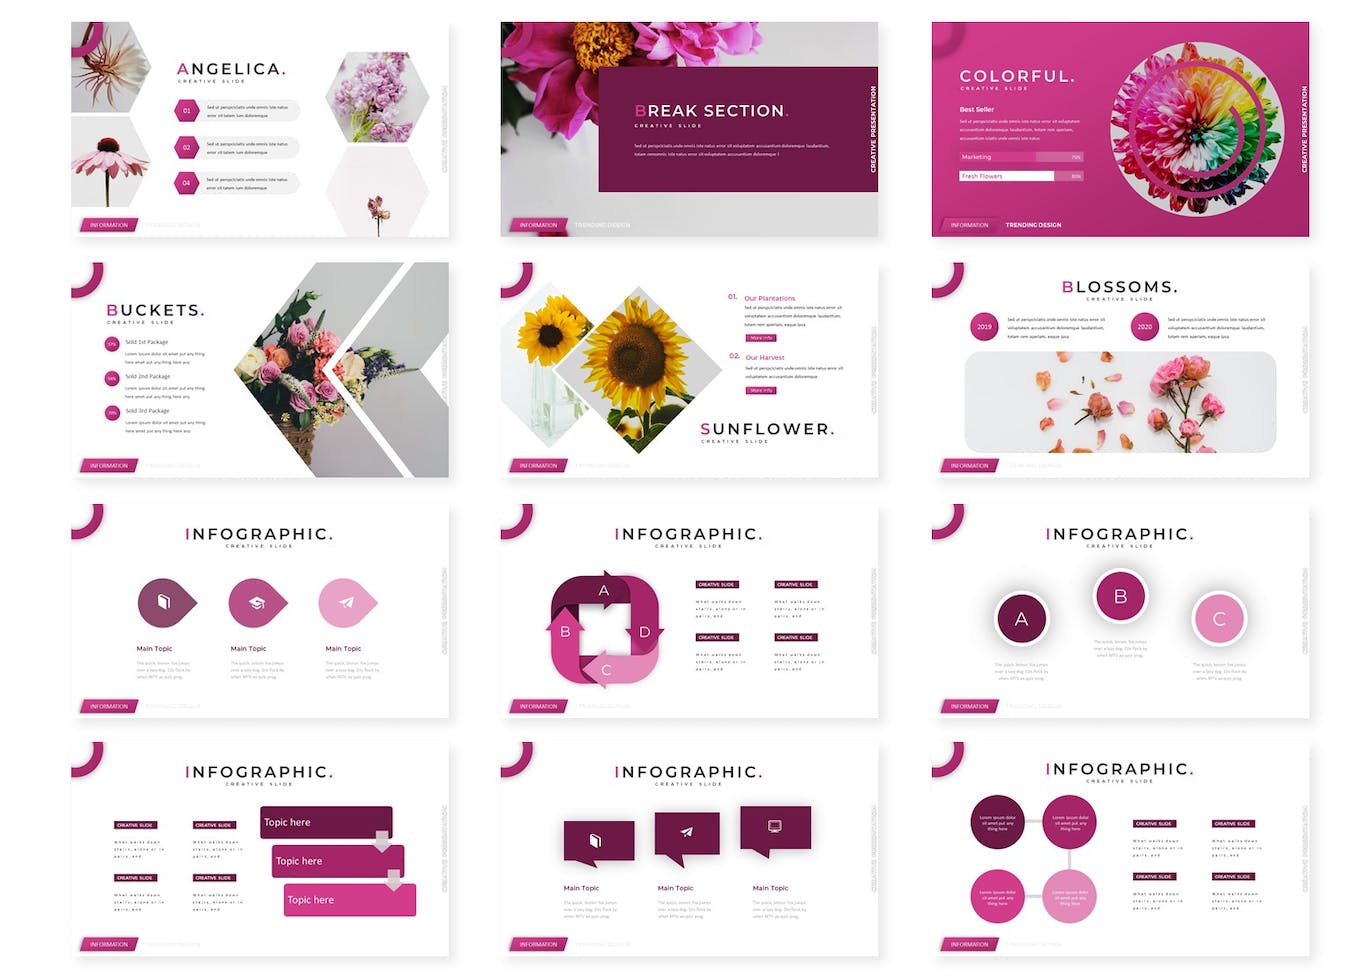 A selection of images of beautiful presentation template slides in pink and white colors.